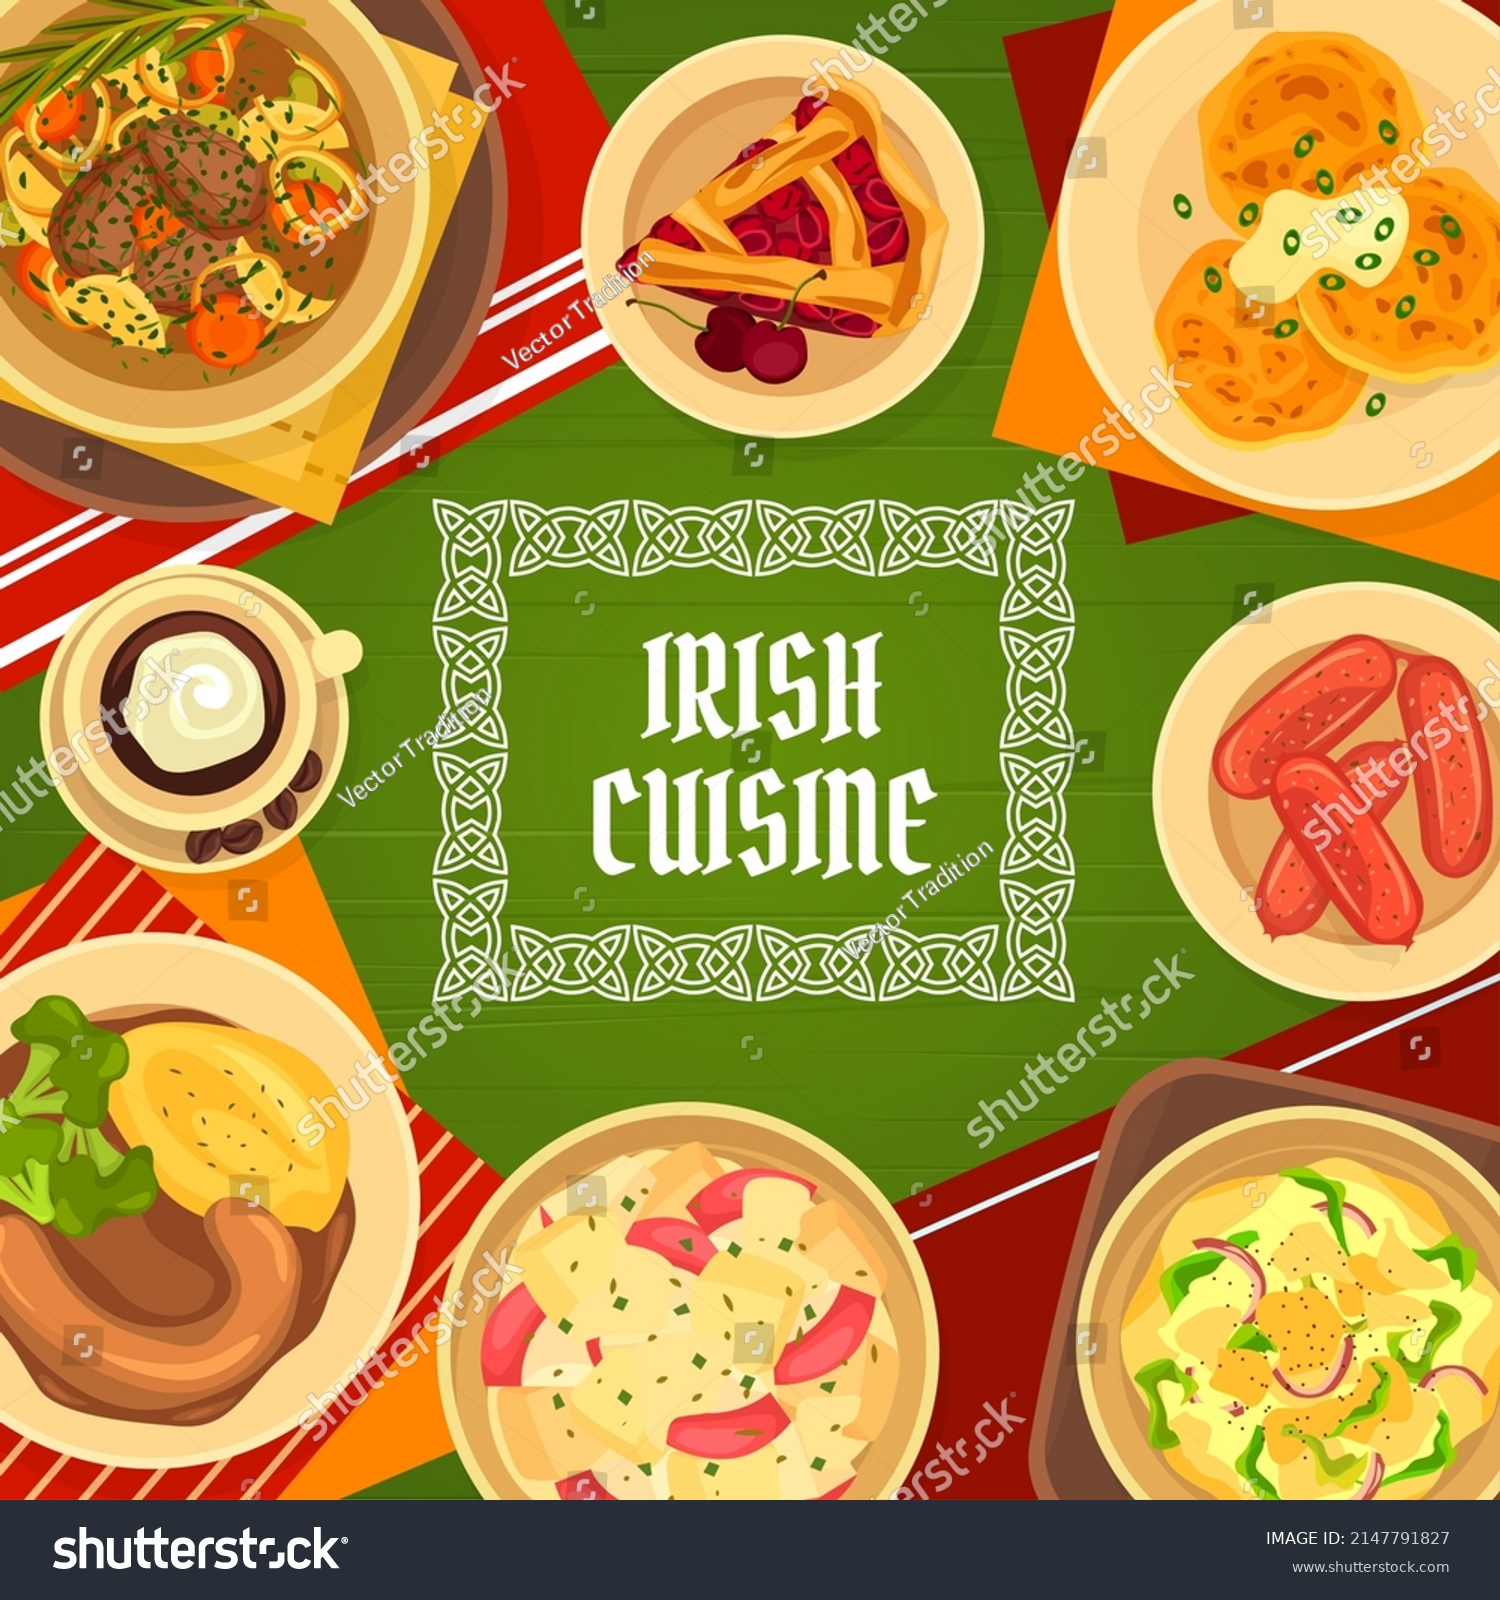 SVG of Irish cuisine restaurant meat, vegetables meals menu cover. Homemade pork sausages, beef vegetable Irish stew and cherry pie, potato salad, meat and beer stew, Boxty potato pancake, soda bread vector svg